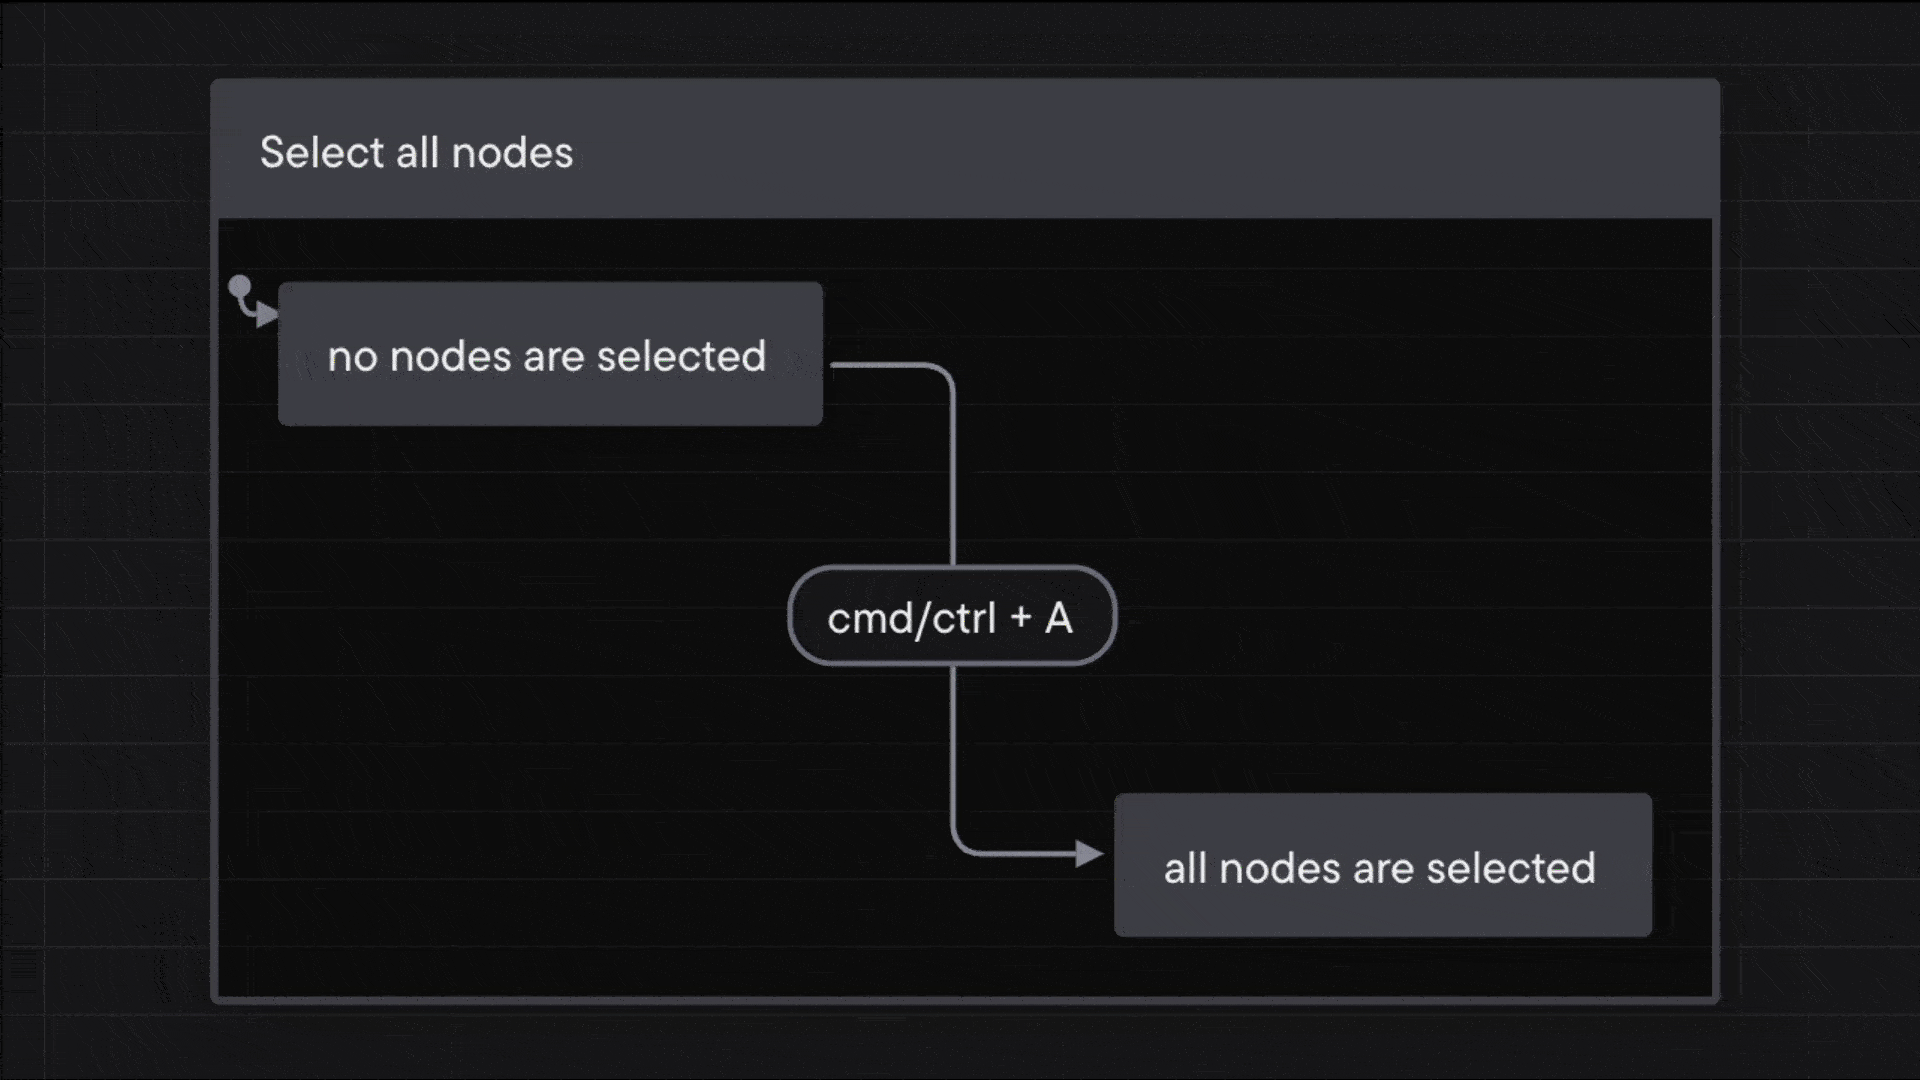 Statechart showing a no nodes selected state then an event of using cmd/ctrl + A transitioning to an all node selected state.